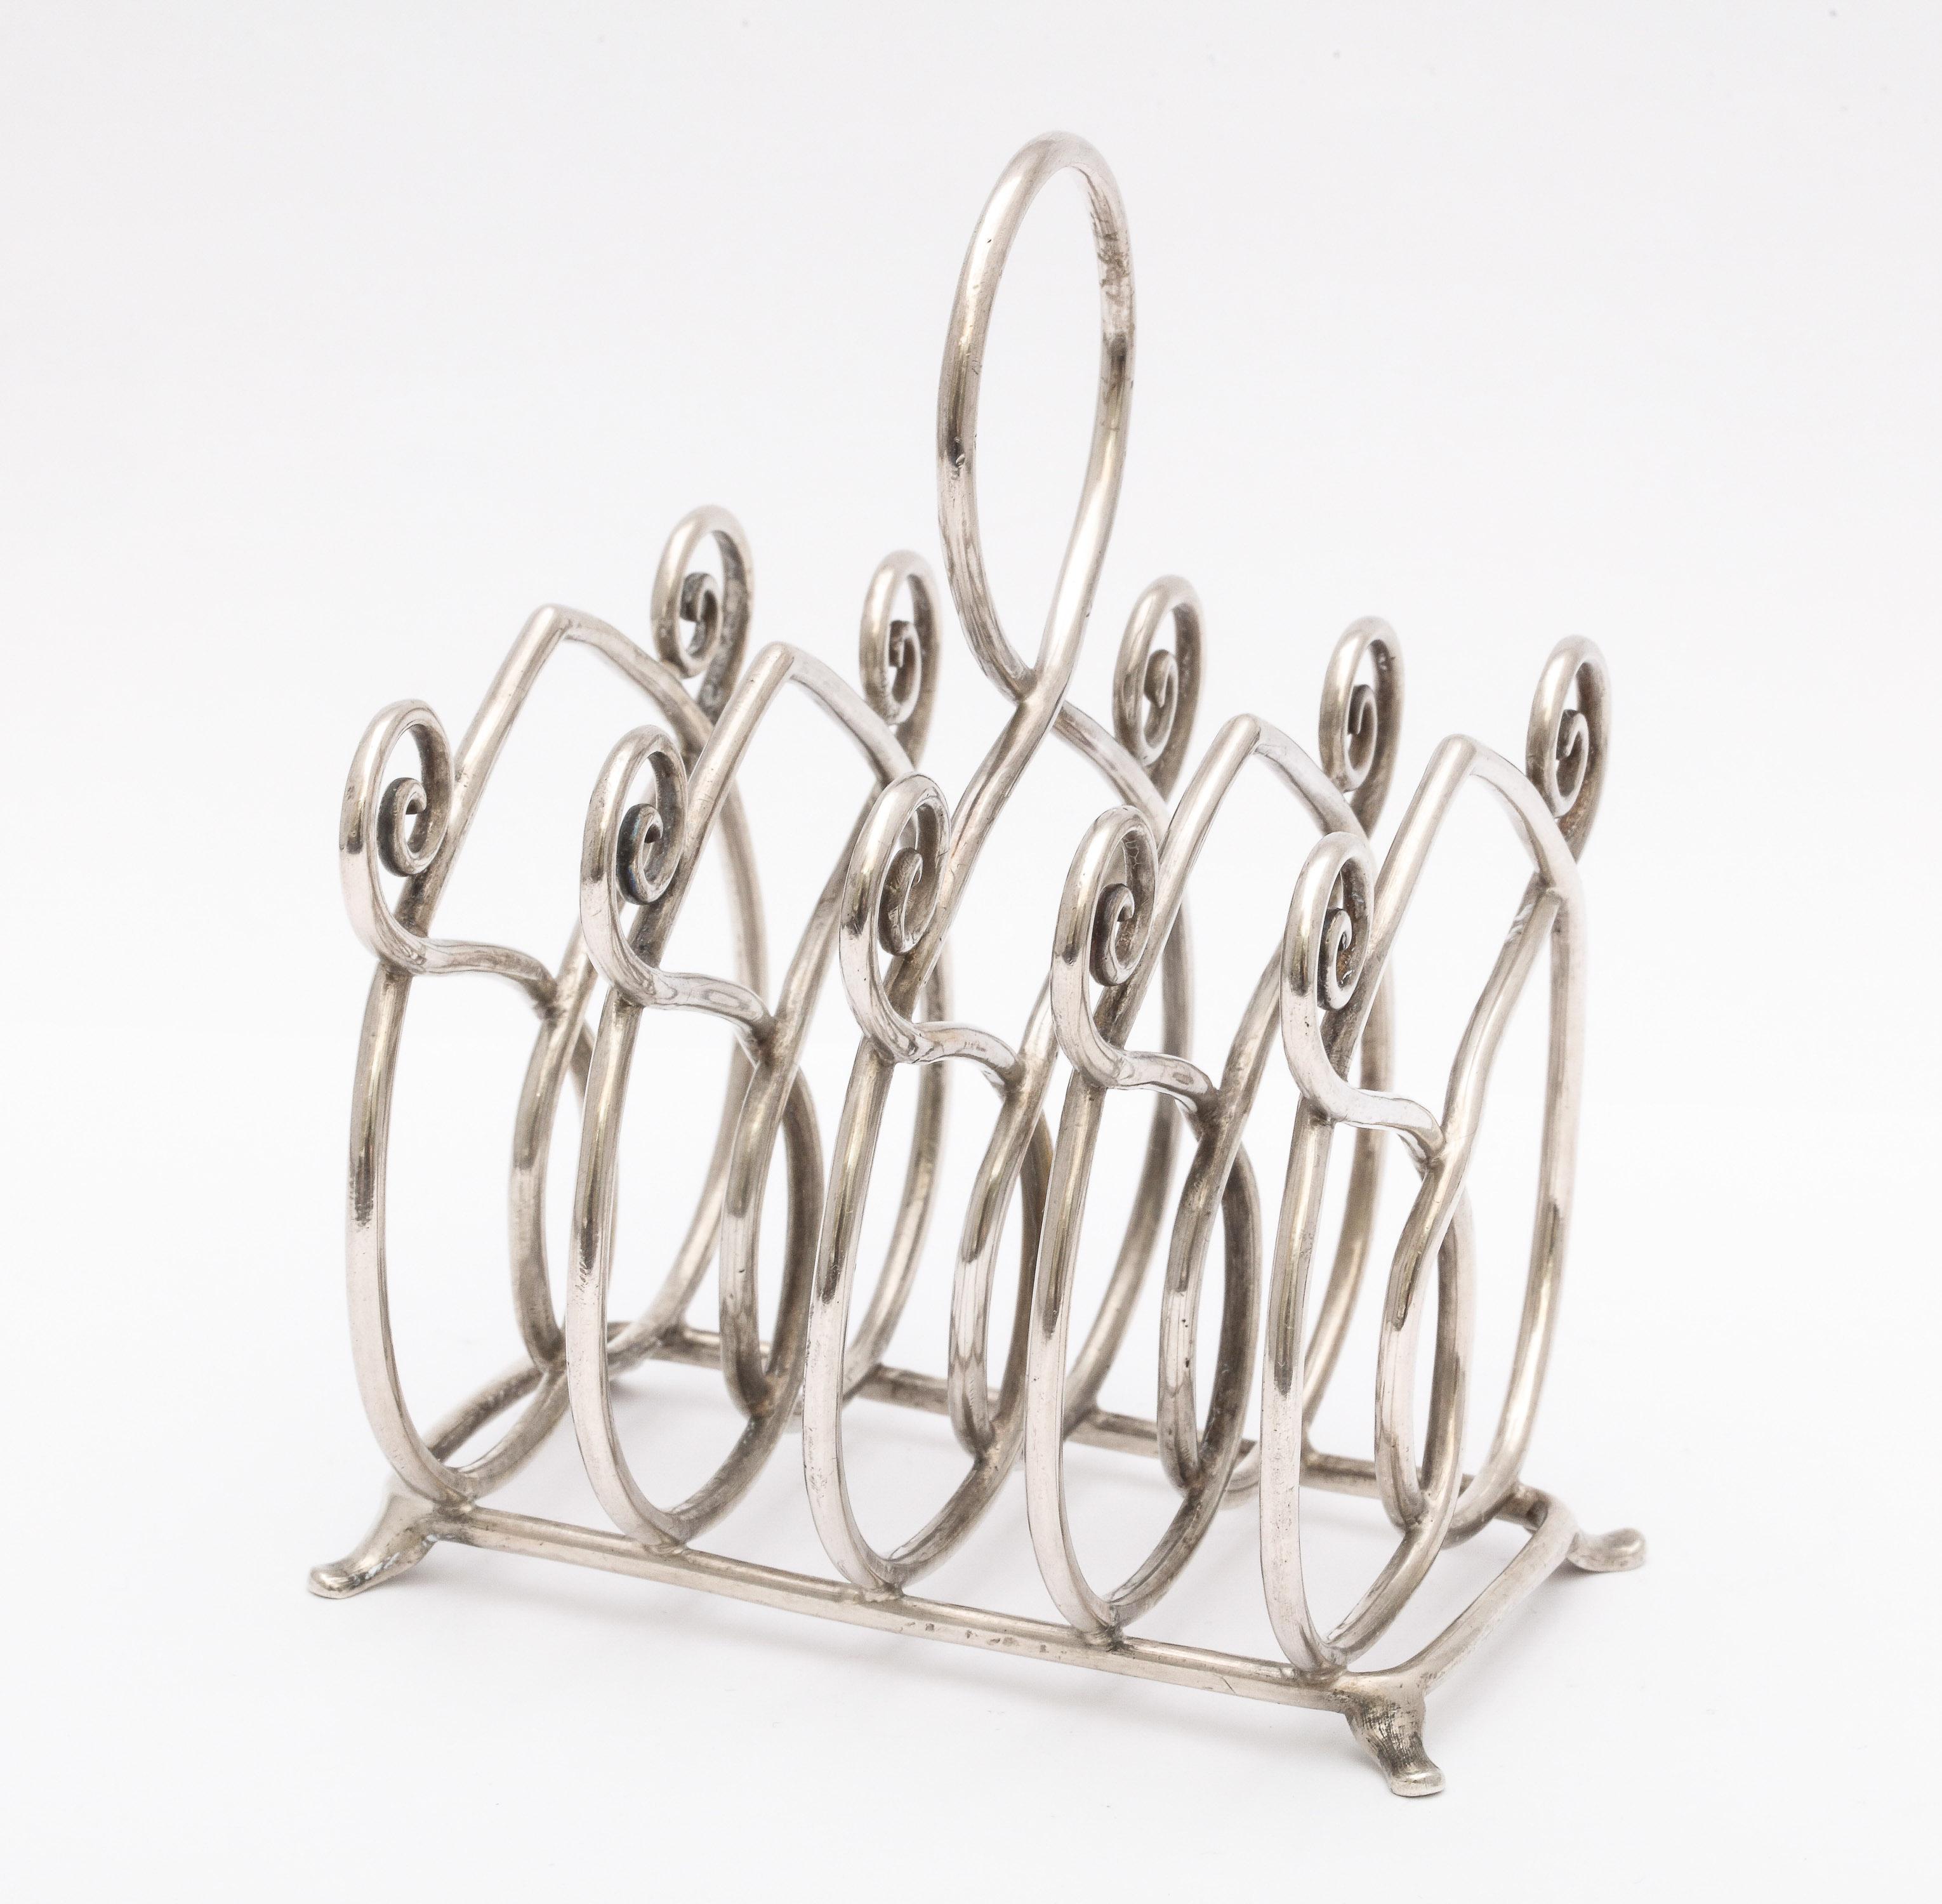 Unusual, Victorian, footed, sterling silver toast rack Gorham Manufacturing Company, Providence, Rhode Island, circa 1895. Sterling silver wires that separate slices of toast are designed to look like upside-down hearts. Measures 3 1/2 inches wide x